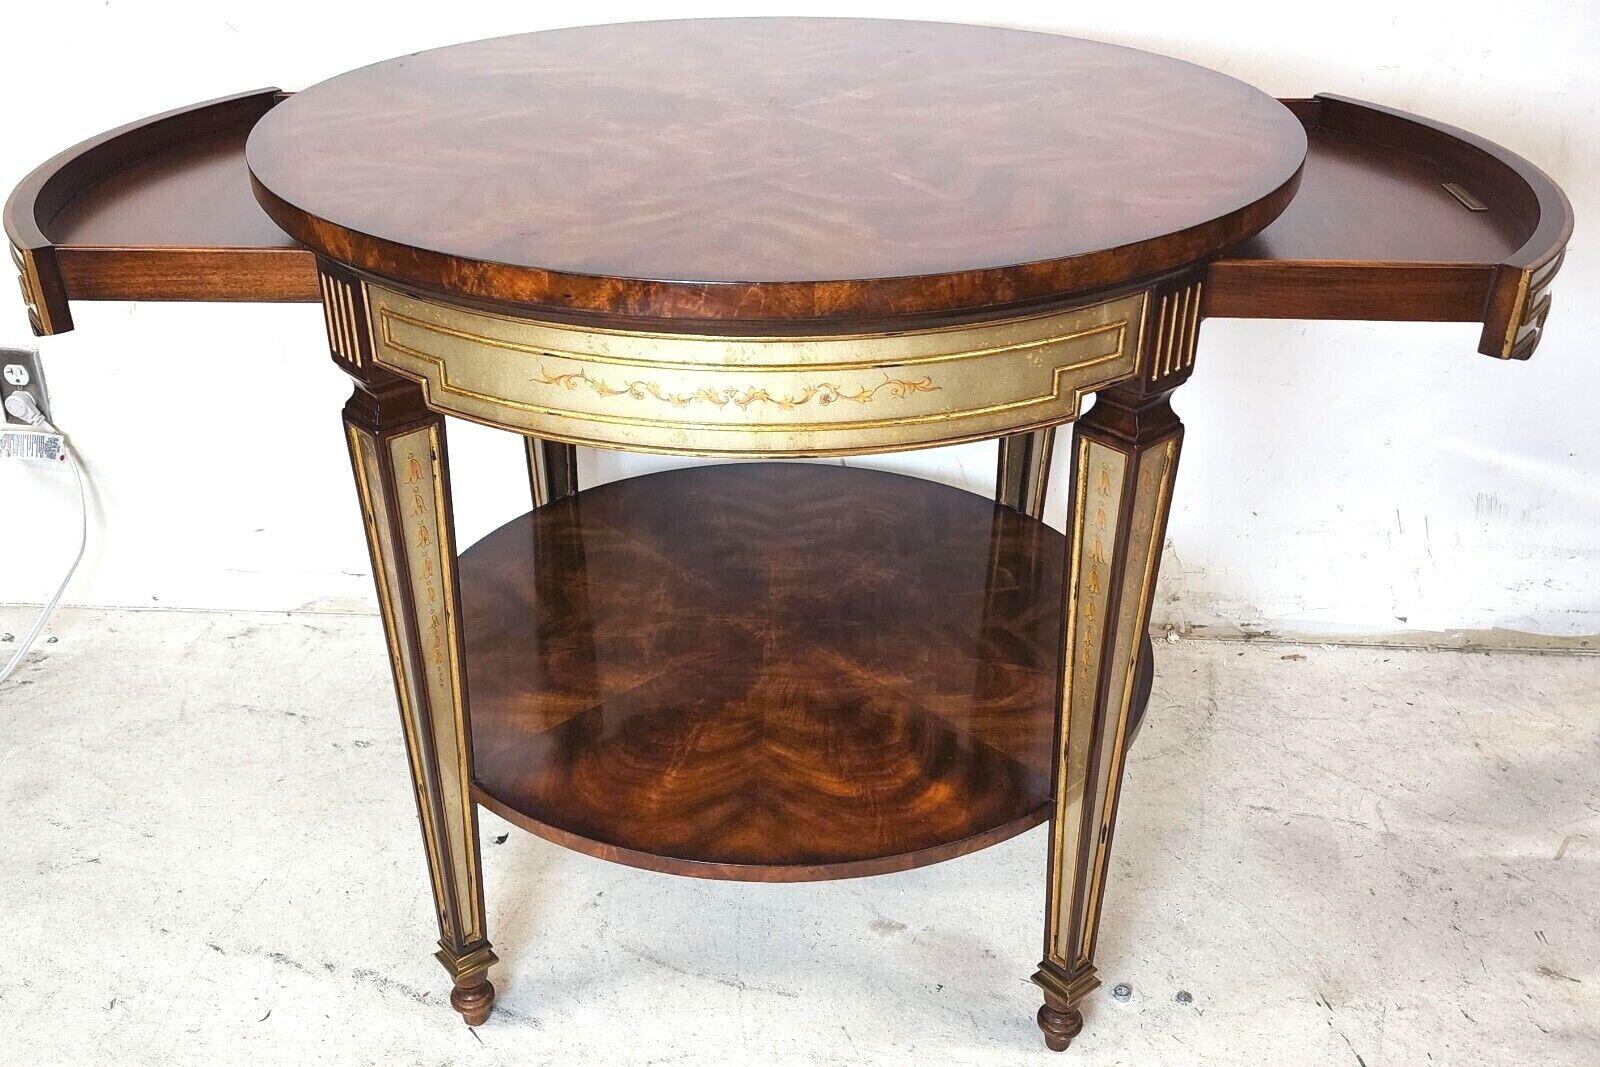 Offering one of our recent palm beach estate fine furniture acquisitions of a
Theodore Alexander regency 2 drawer eglomise occasional side table.
Featuring 2 drawers on either side and flame mahogany top and bottom surfaces.

Approximate